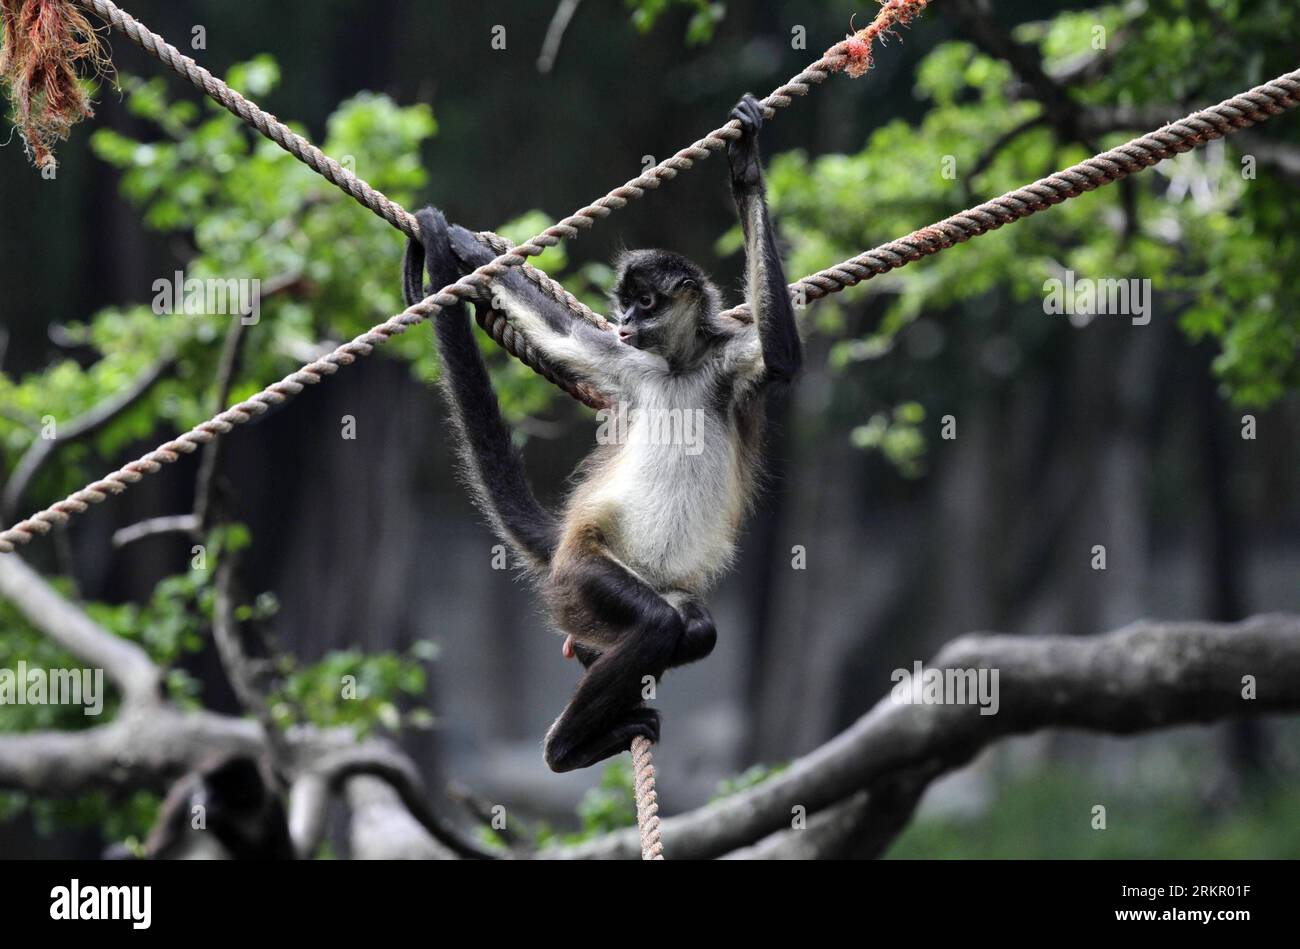 Bildnummer: 58080755  Datum: 05.06.2012  Copyright: imago/Xinhua (120608) -- SAN SALVADOR, June 8, 2012 (Xinhua) -- A spider monkey (Ateles Geoffroyi), endangered, remains in captivity at a zoo in San Salvador, capital of El Salvador, June 5, 2012. The National Zoo received 40,000 visits per year and kept in captivity 117 animal species, mainly in danger of extinction in the country. (Xinhua/Oscar Rivera) (ctt) EL SALVADOR-SAN SALVADOR-ZOO PUBLICATIONxNOTxINxCHN Gesellschaft Tiere xns x2x 2012 quer o0 Geoffroy-Klammeraffe Affe Klettern     58080755 Date 05 06 2012 Copyright Imago XINHUA  San S Stock Photo